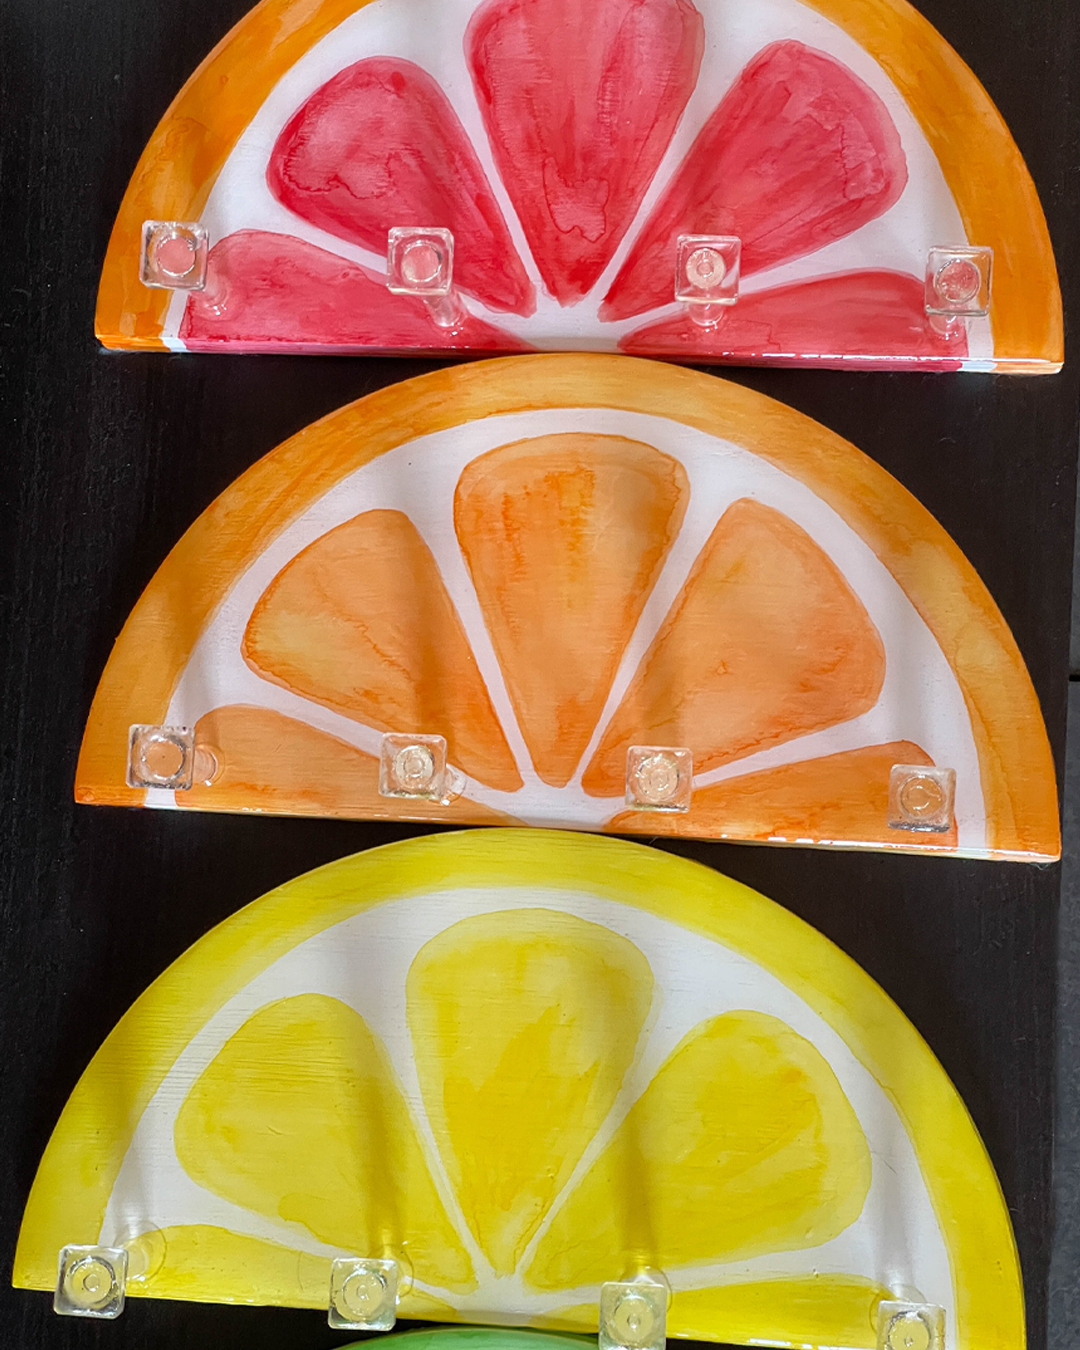 Versatile orange slice key holder, ideal for holding keys, jewelry, and other small household items